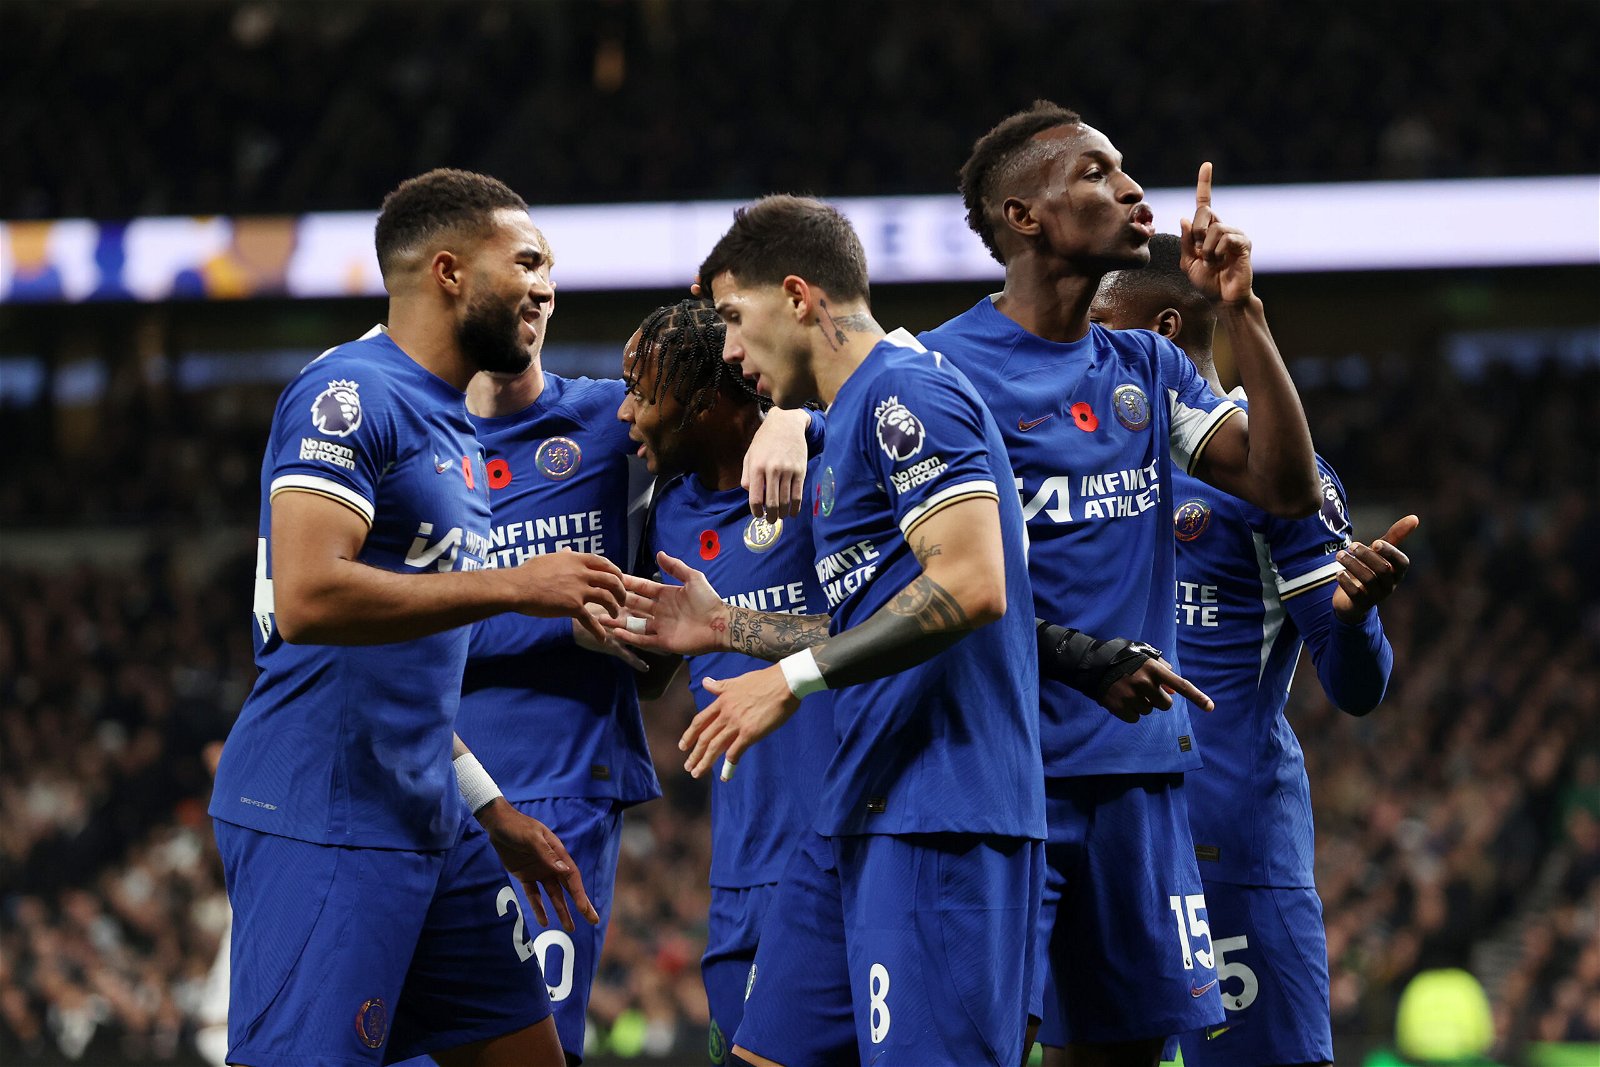 Goals and Highlights: Tottenham 1-4 Chelsea in Premier League 2023